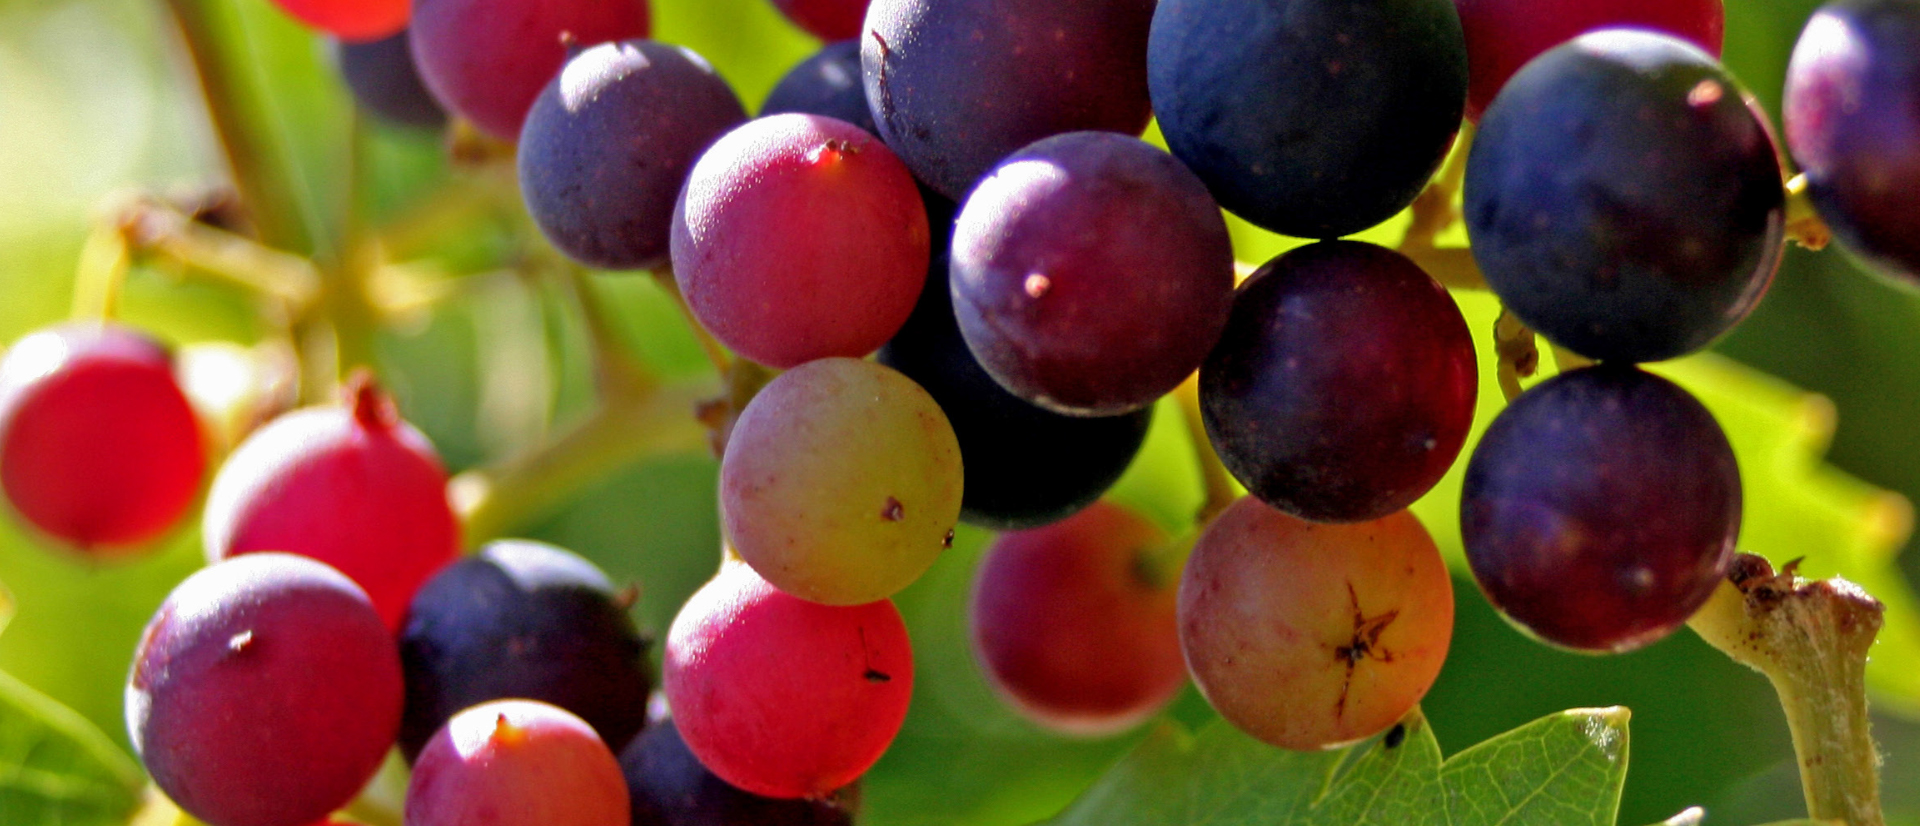 Grape Production Guidelines for Using Circadian Crop Sciences Products